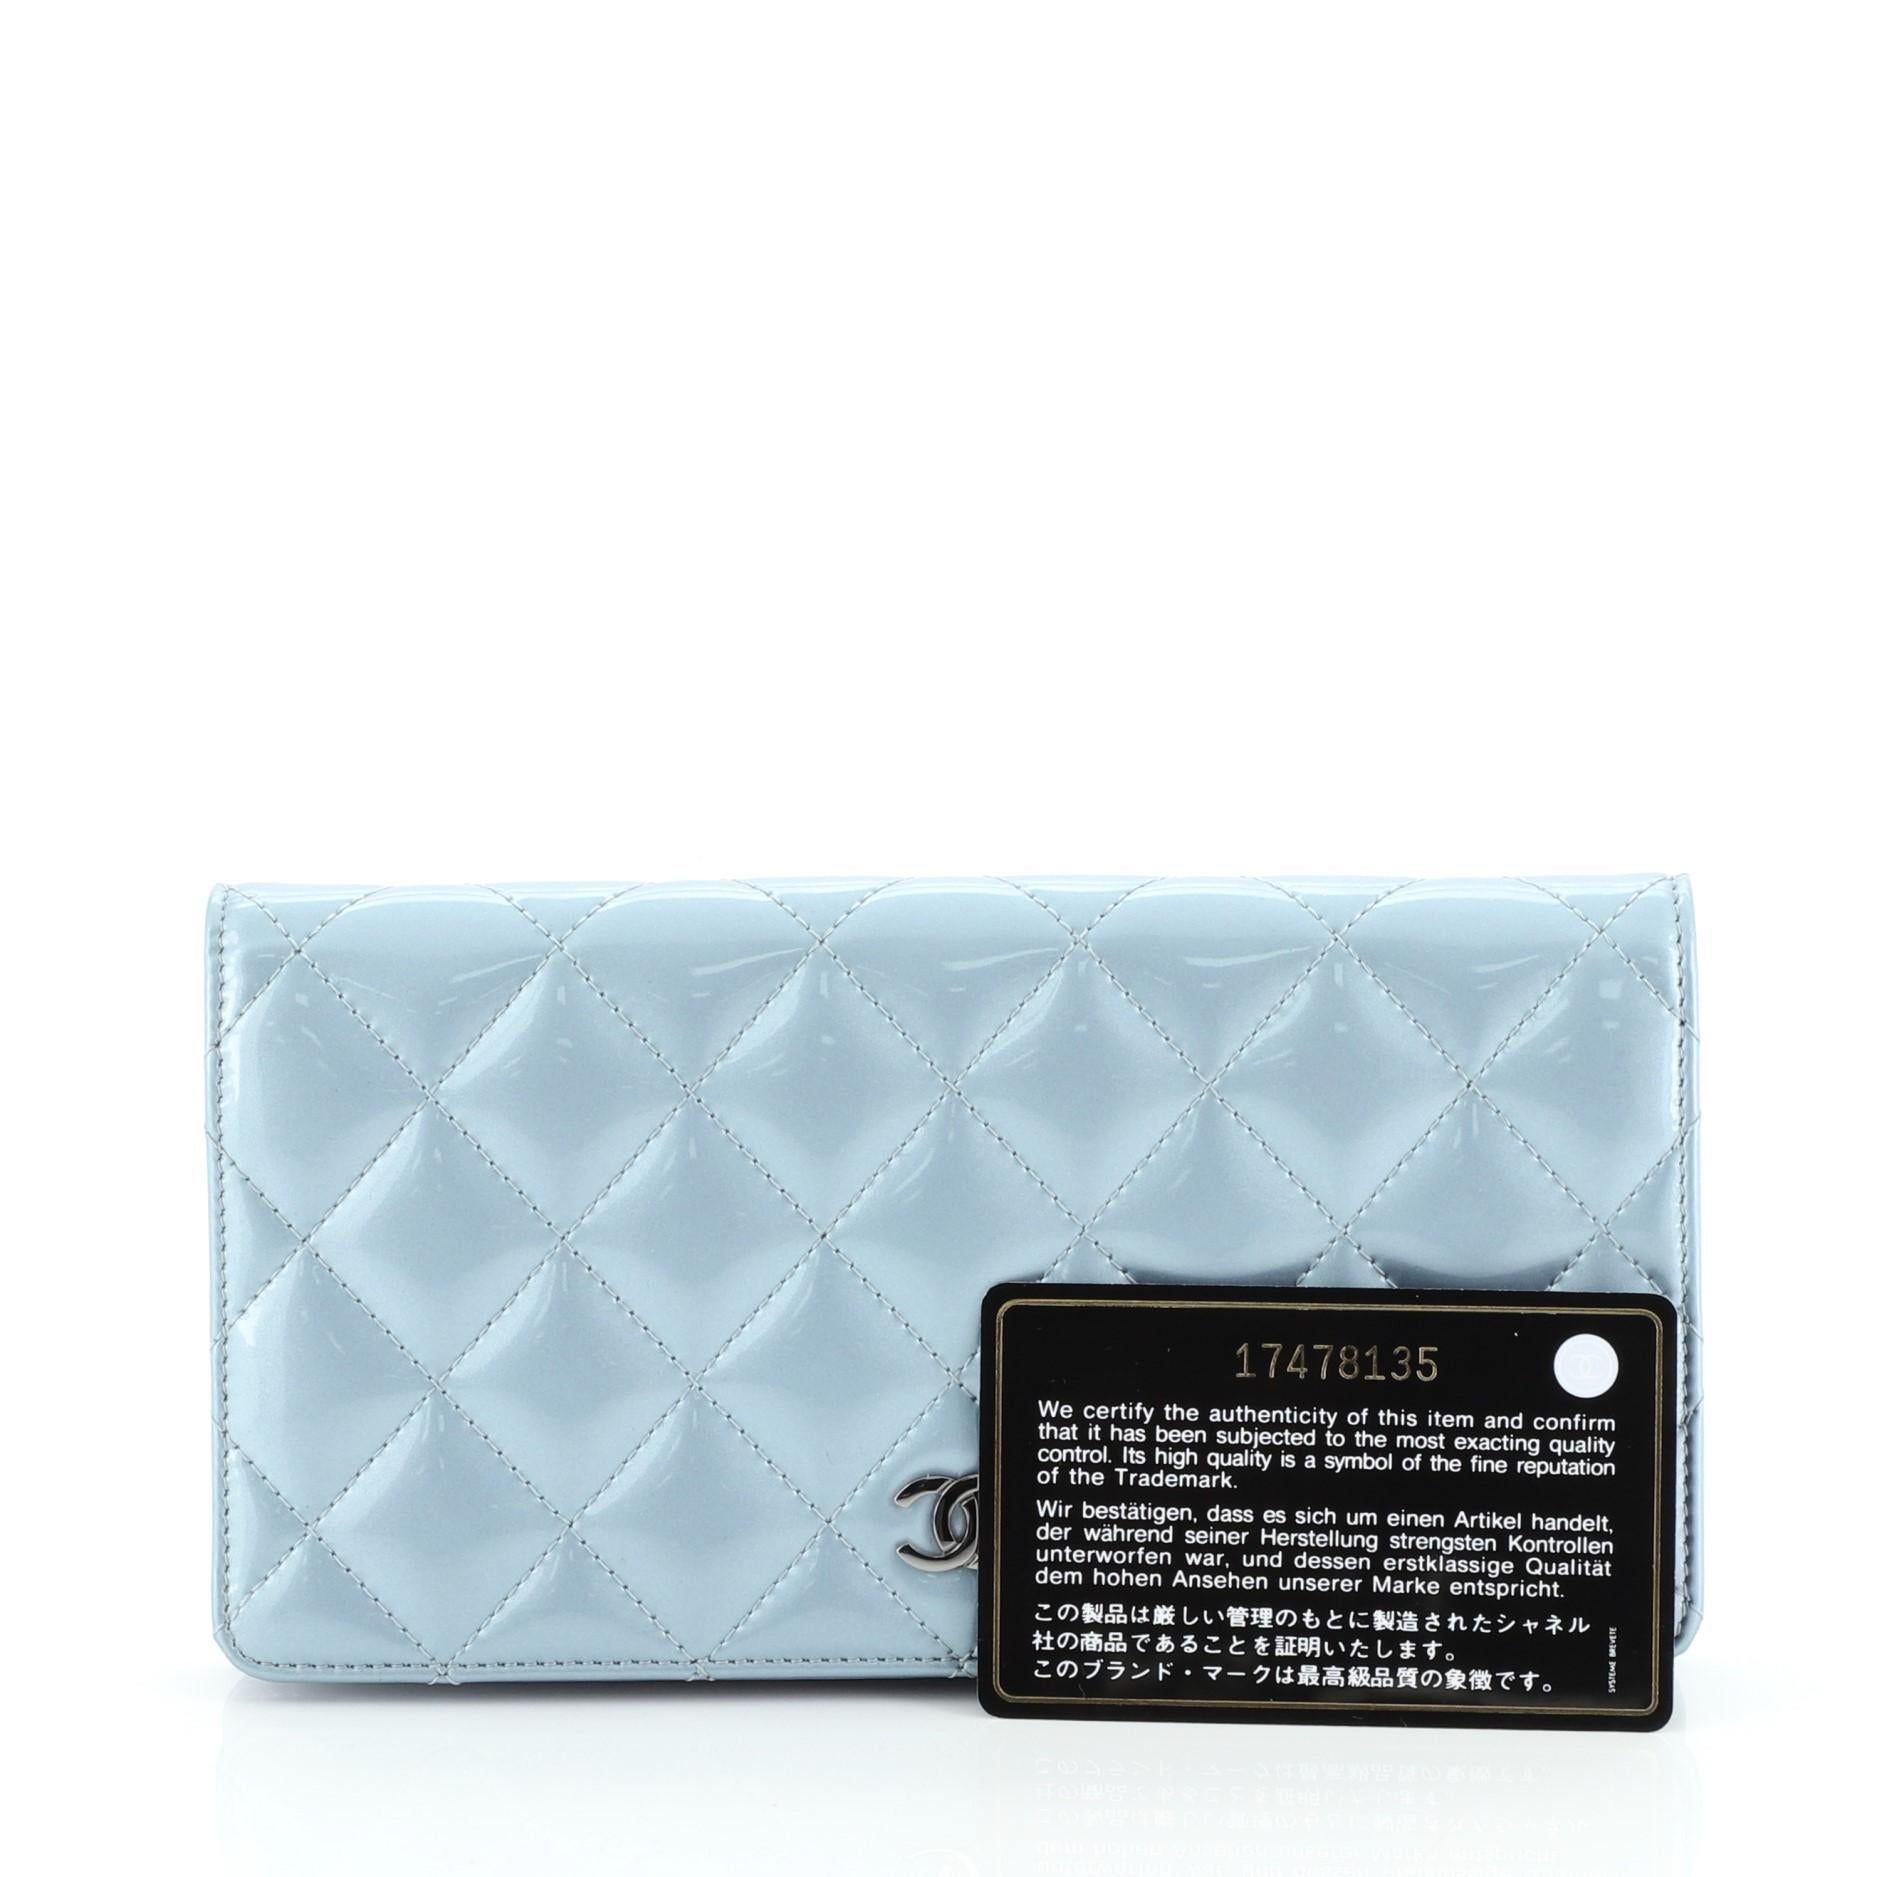 This Chanel Bi-Fold Wallet Quilted Patent, crafted from blue quilted patent leather, features CC logo at front and gunmetal-tone hardware. It opens to a blue leather interior with multiple card slots, zip pocket and slip pockets. Hologram sticker